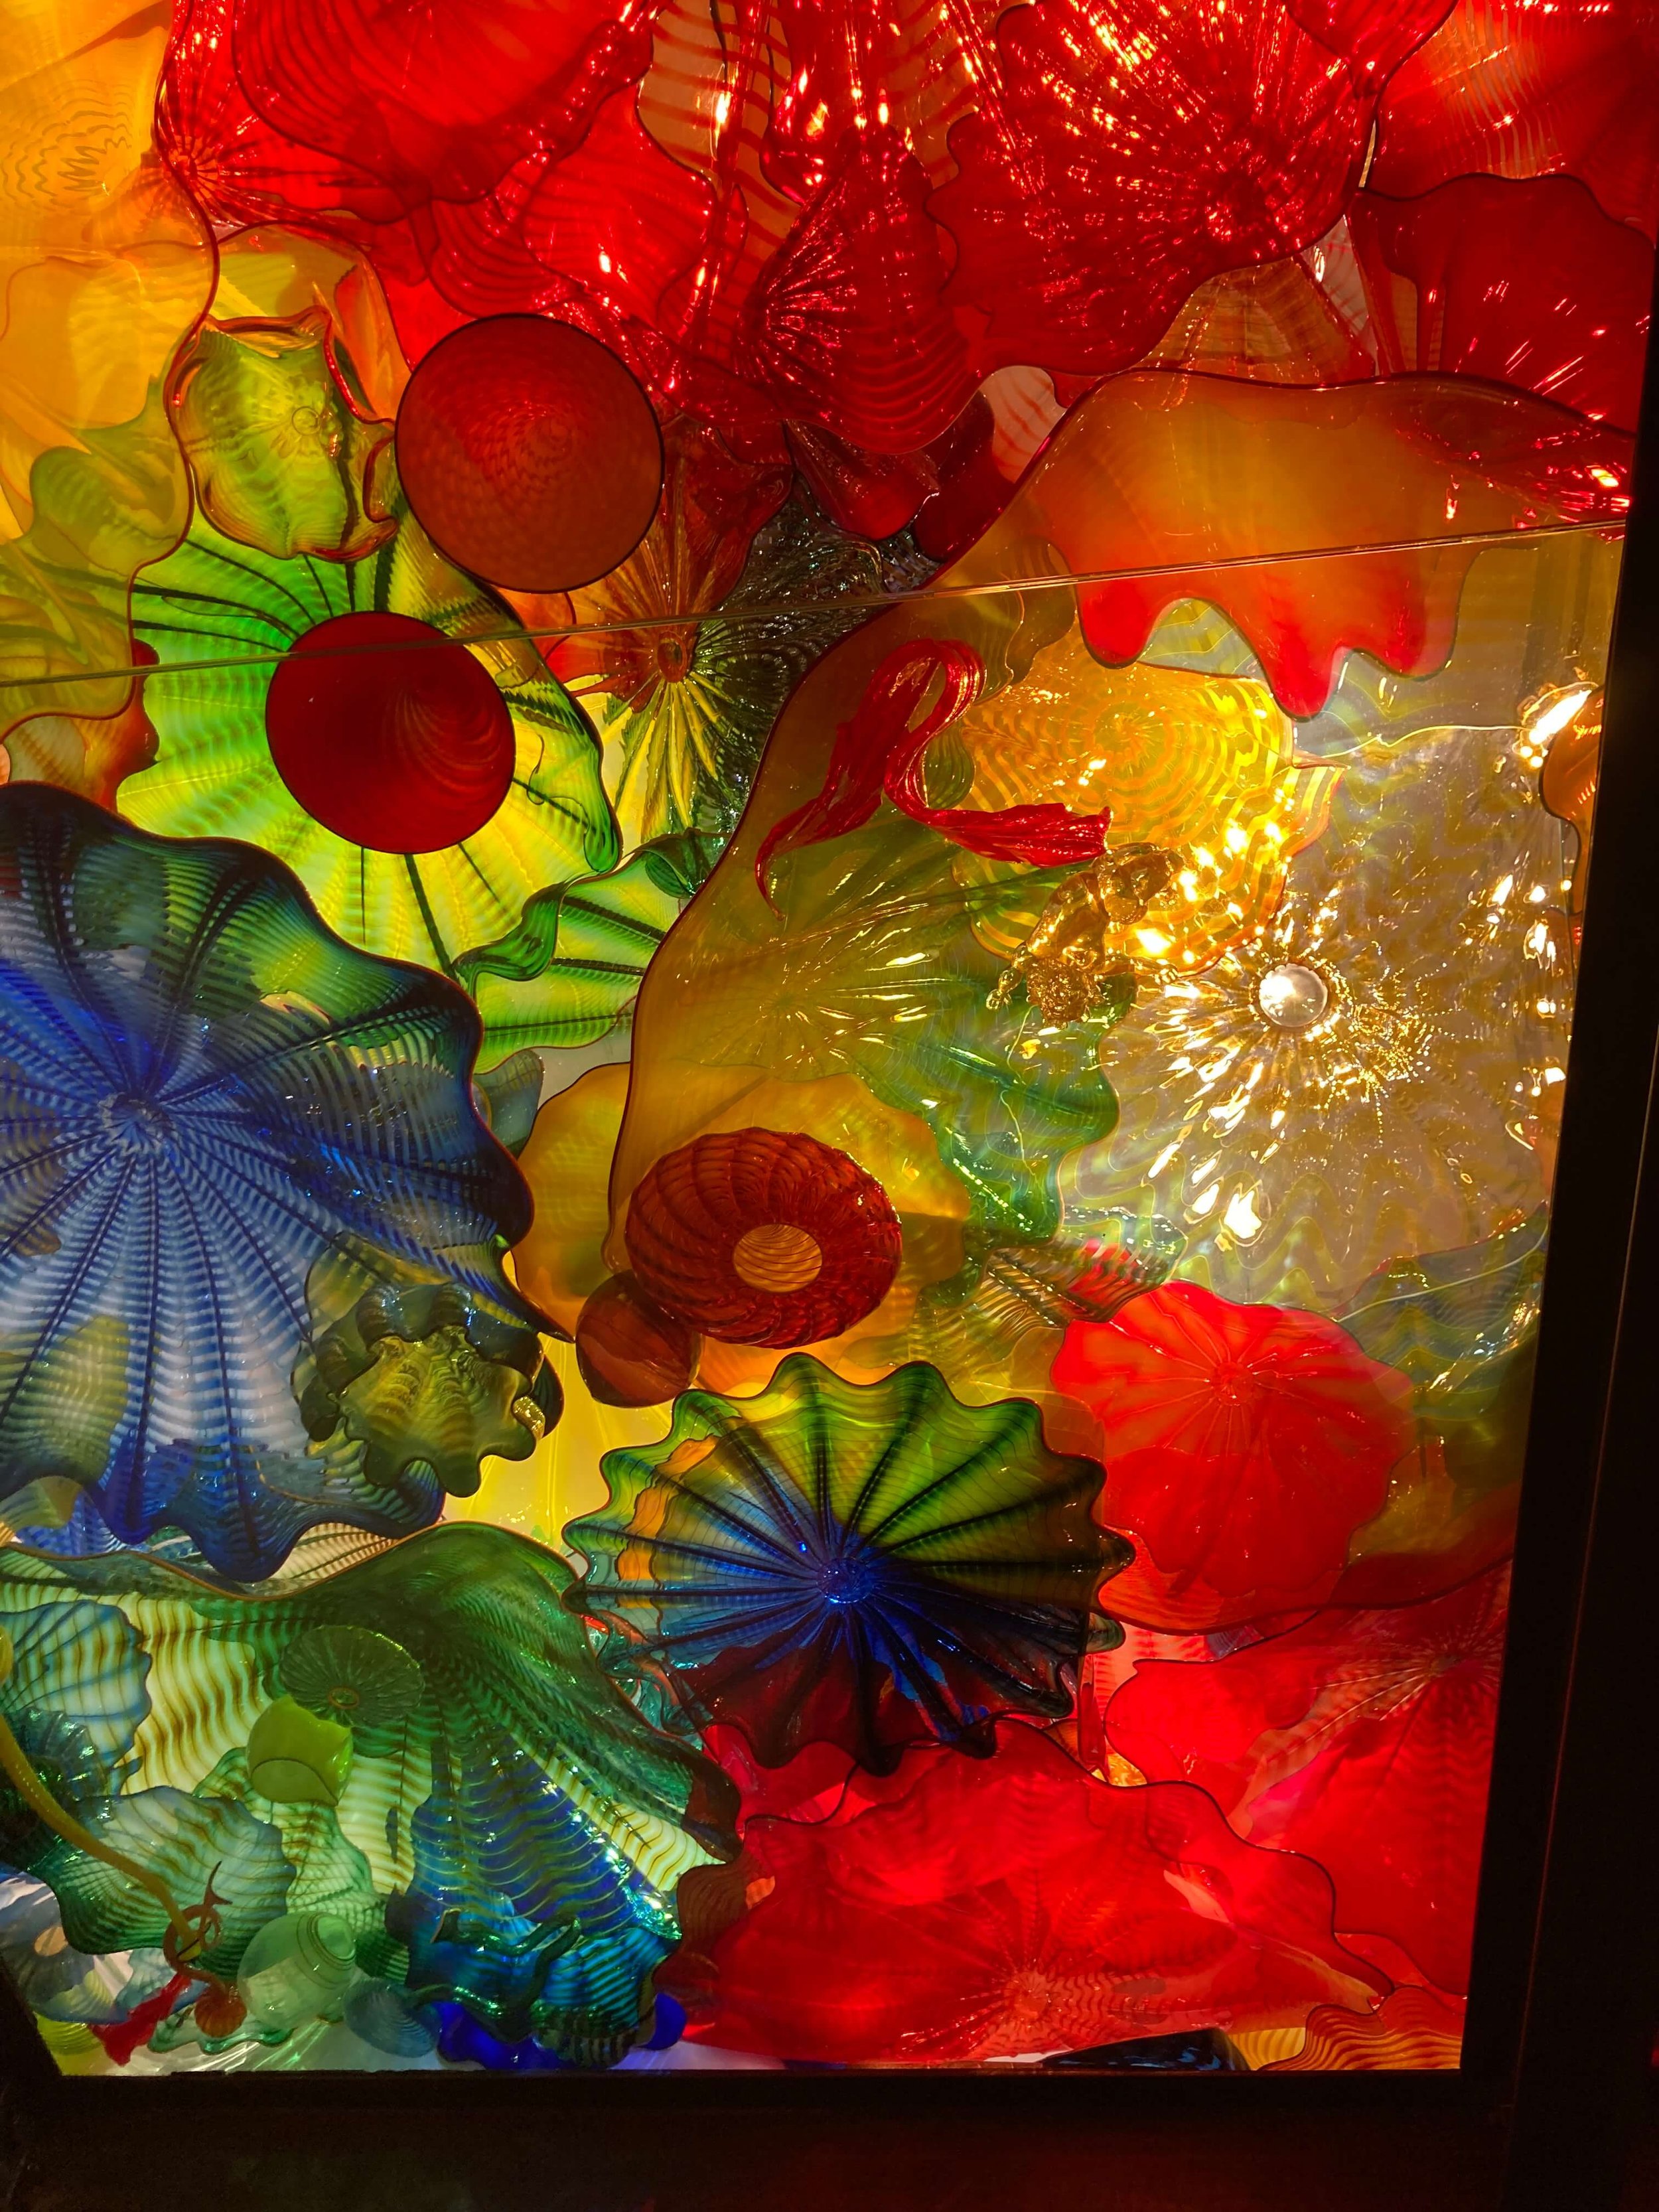 Stunning Chihuly Ceiling Display